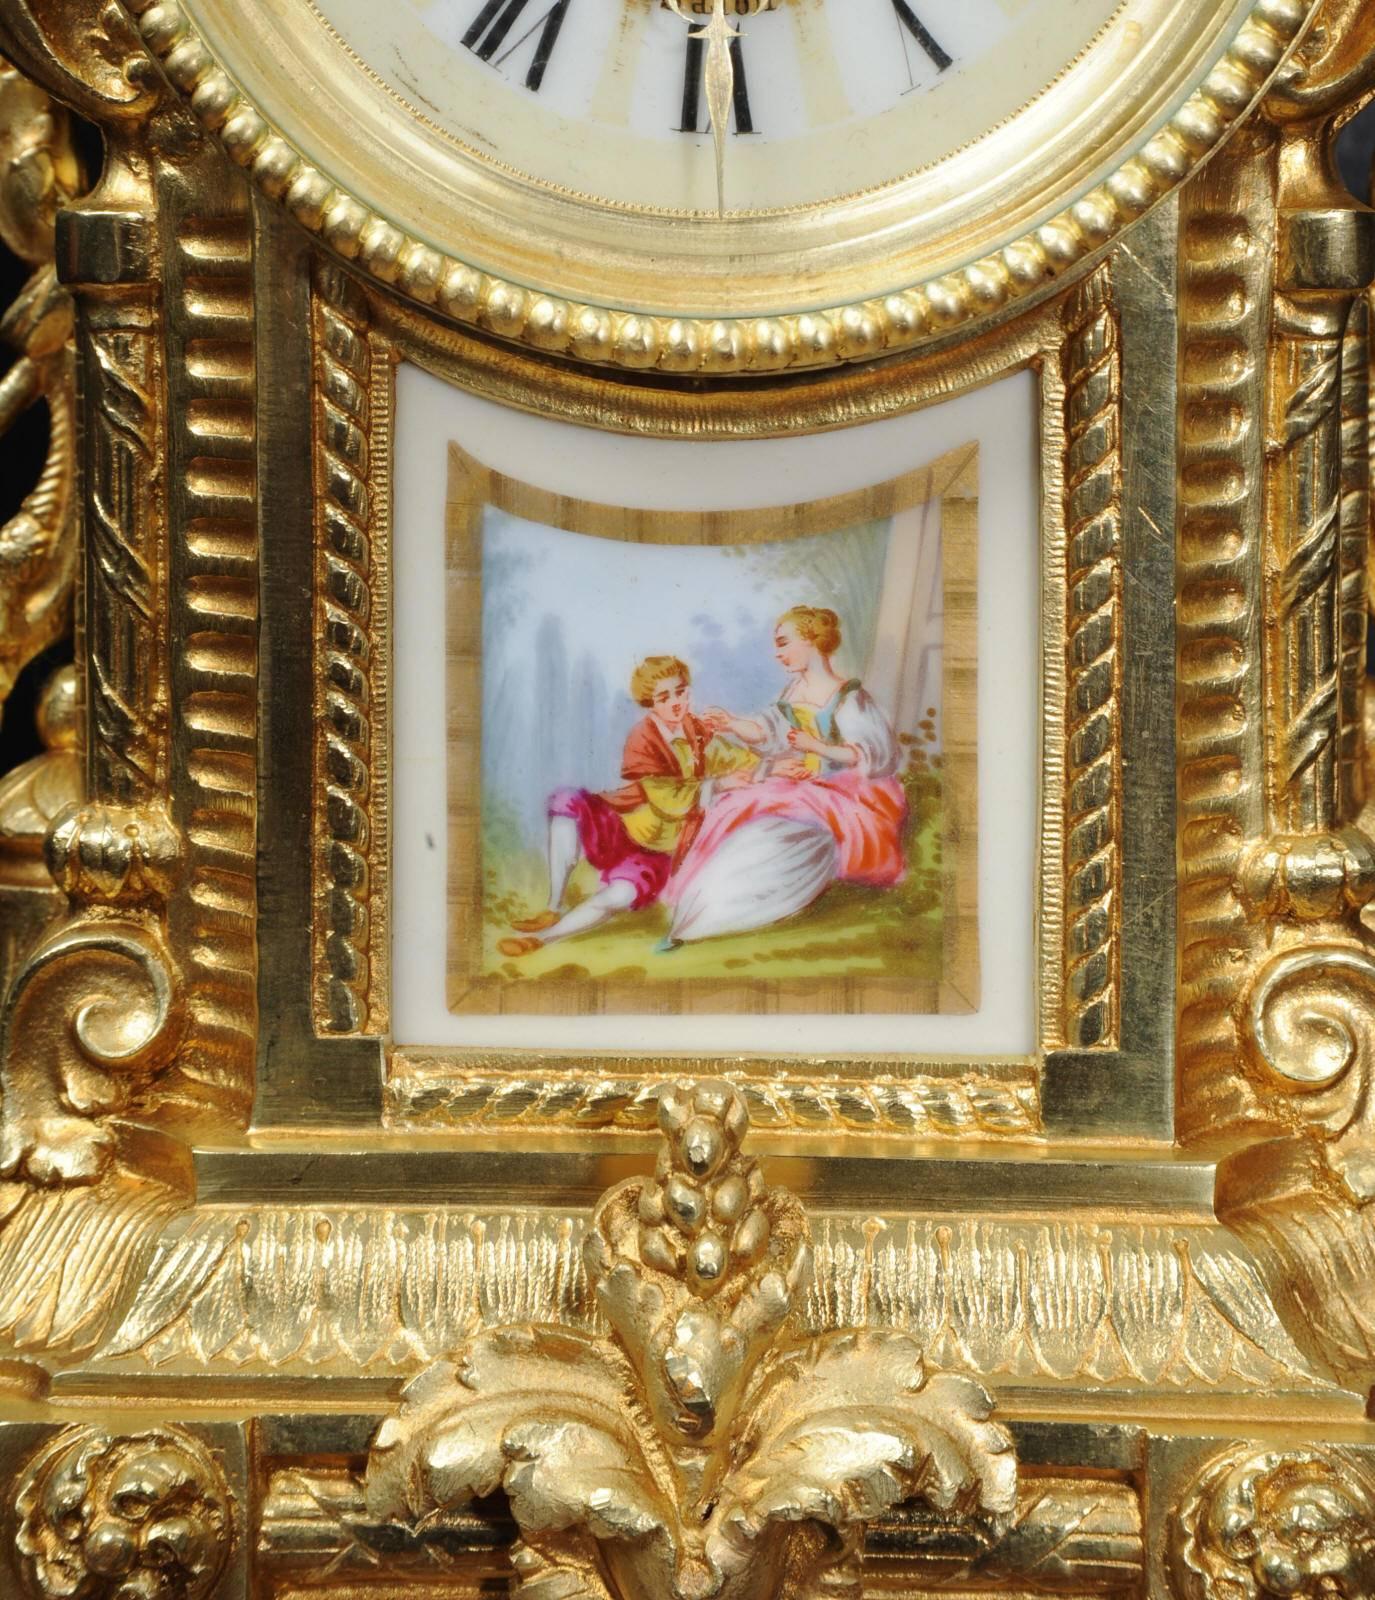 19th Century Ormolu and Sèvres Porcelain Clock by Achille Brocot